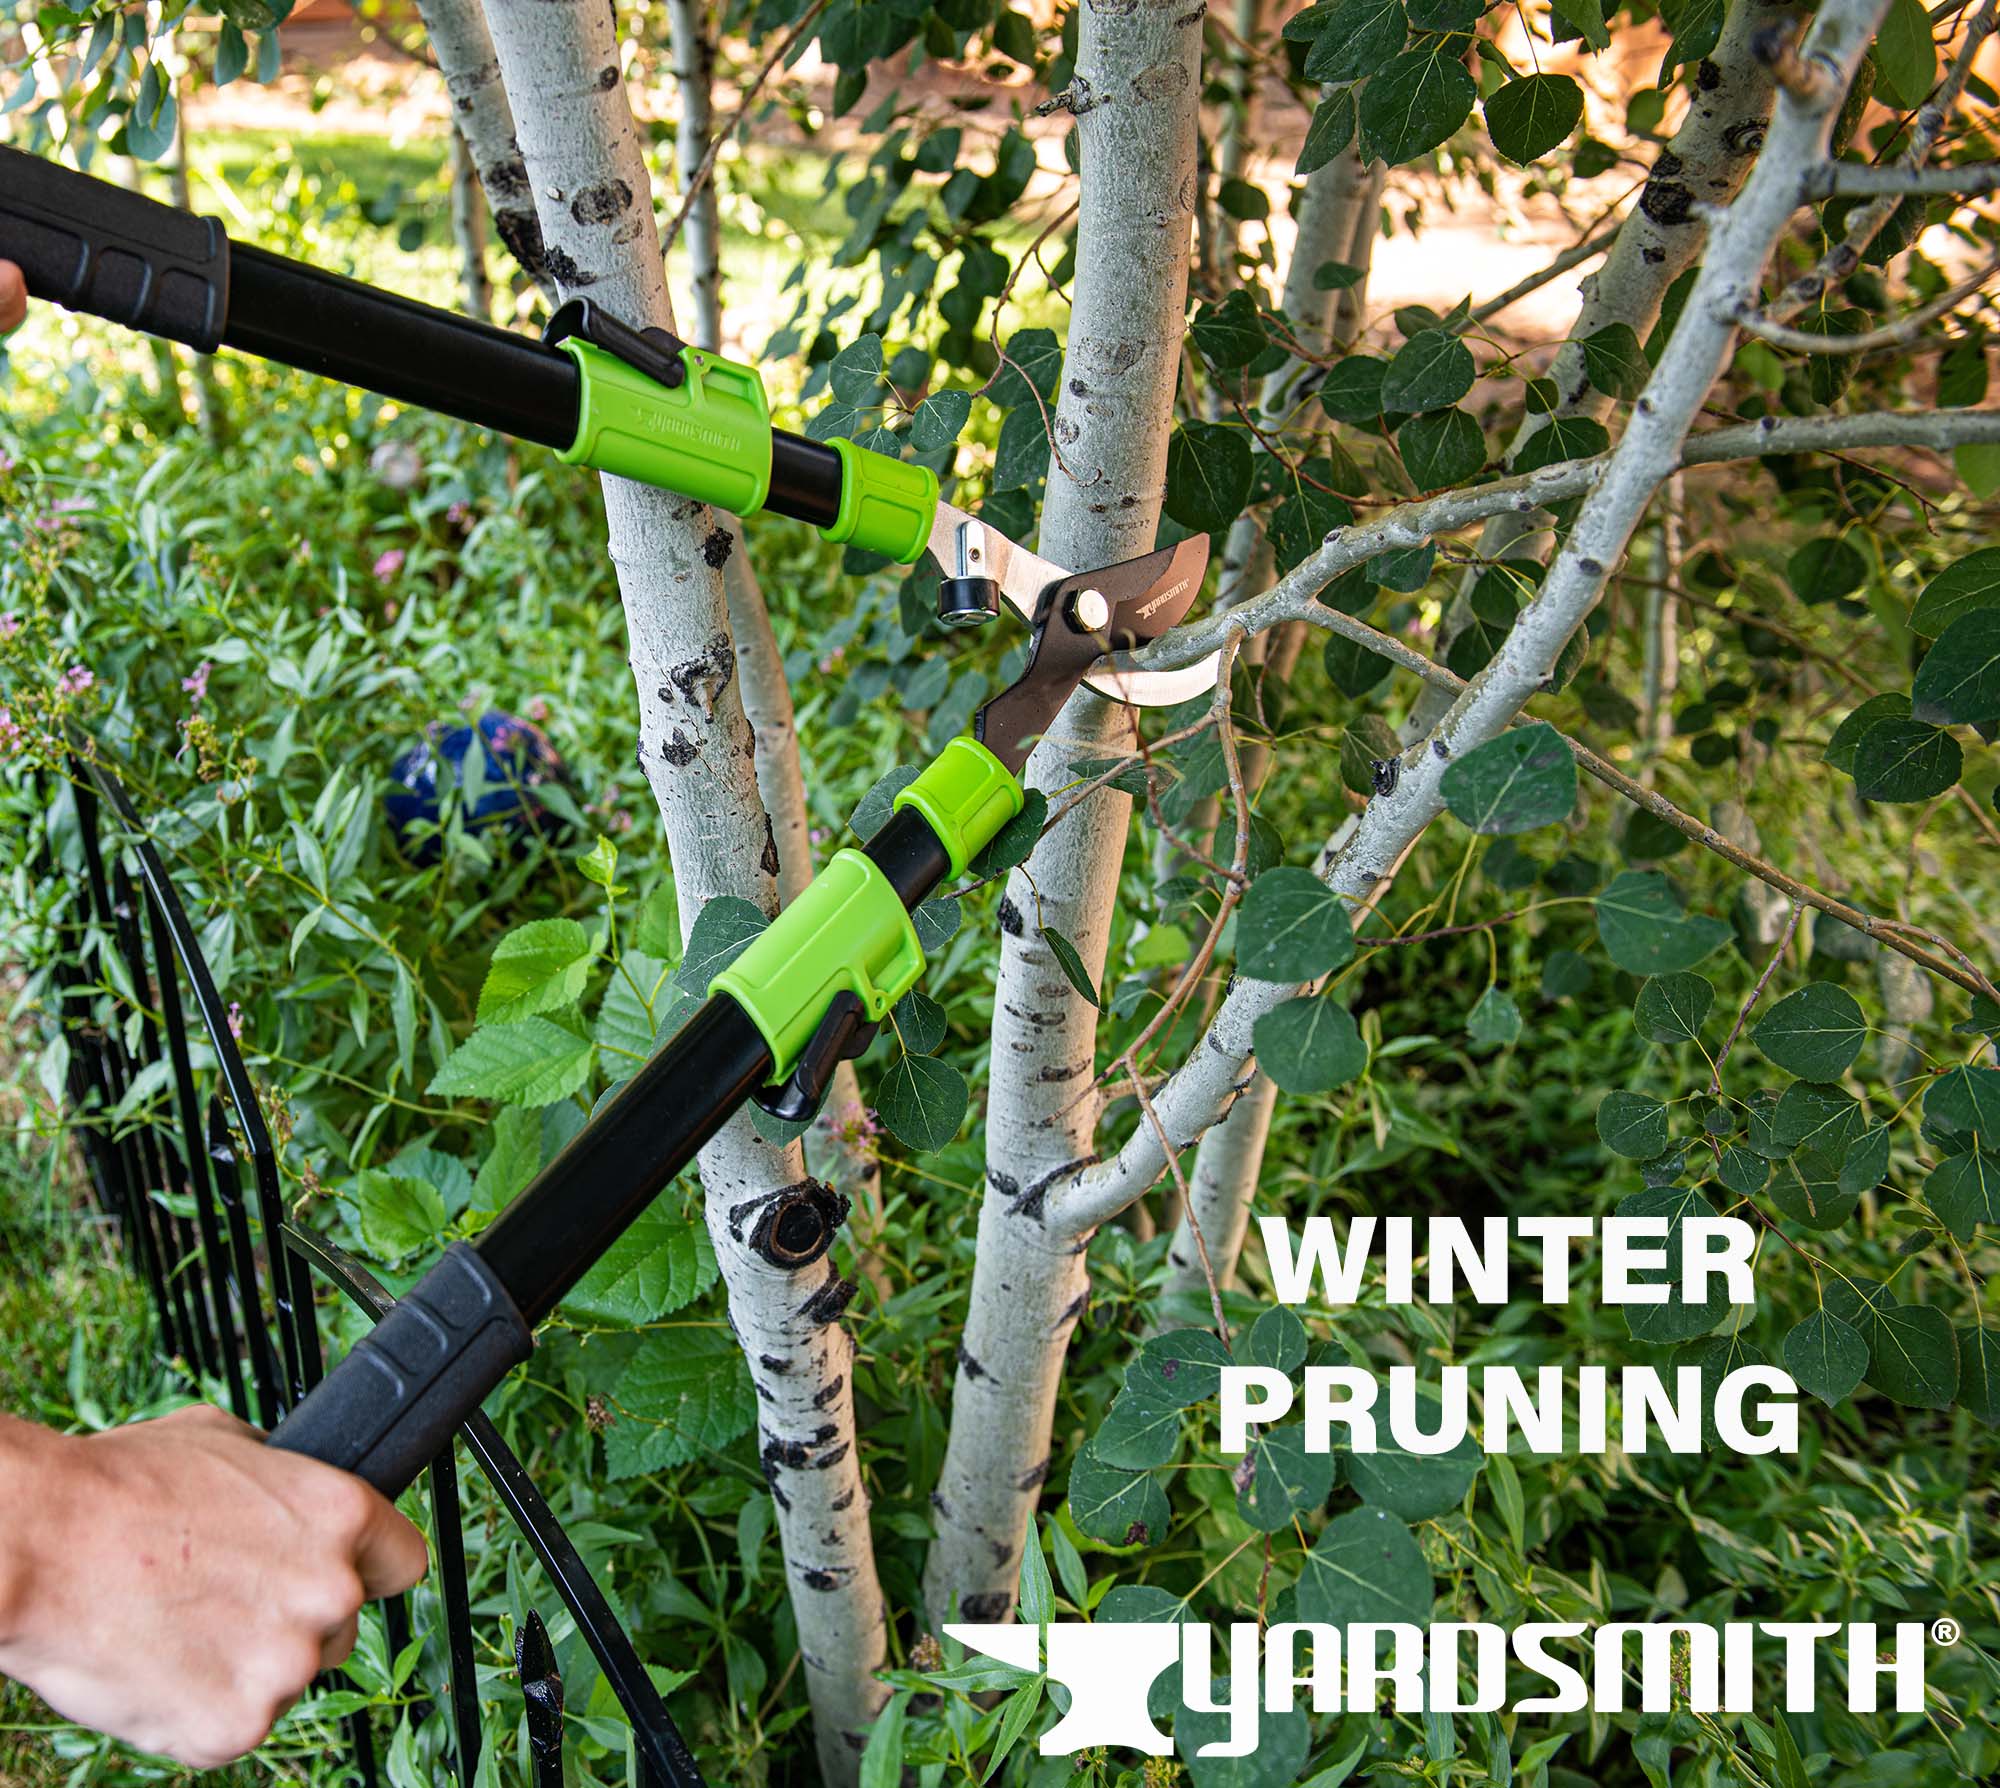 Winter Pruning: When should you do it?